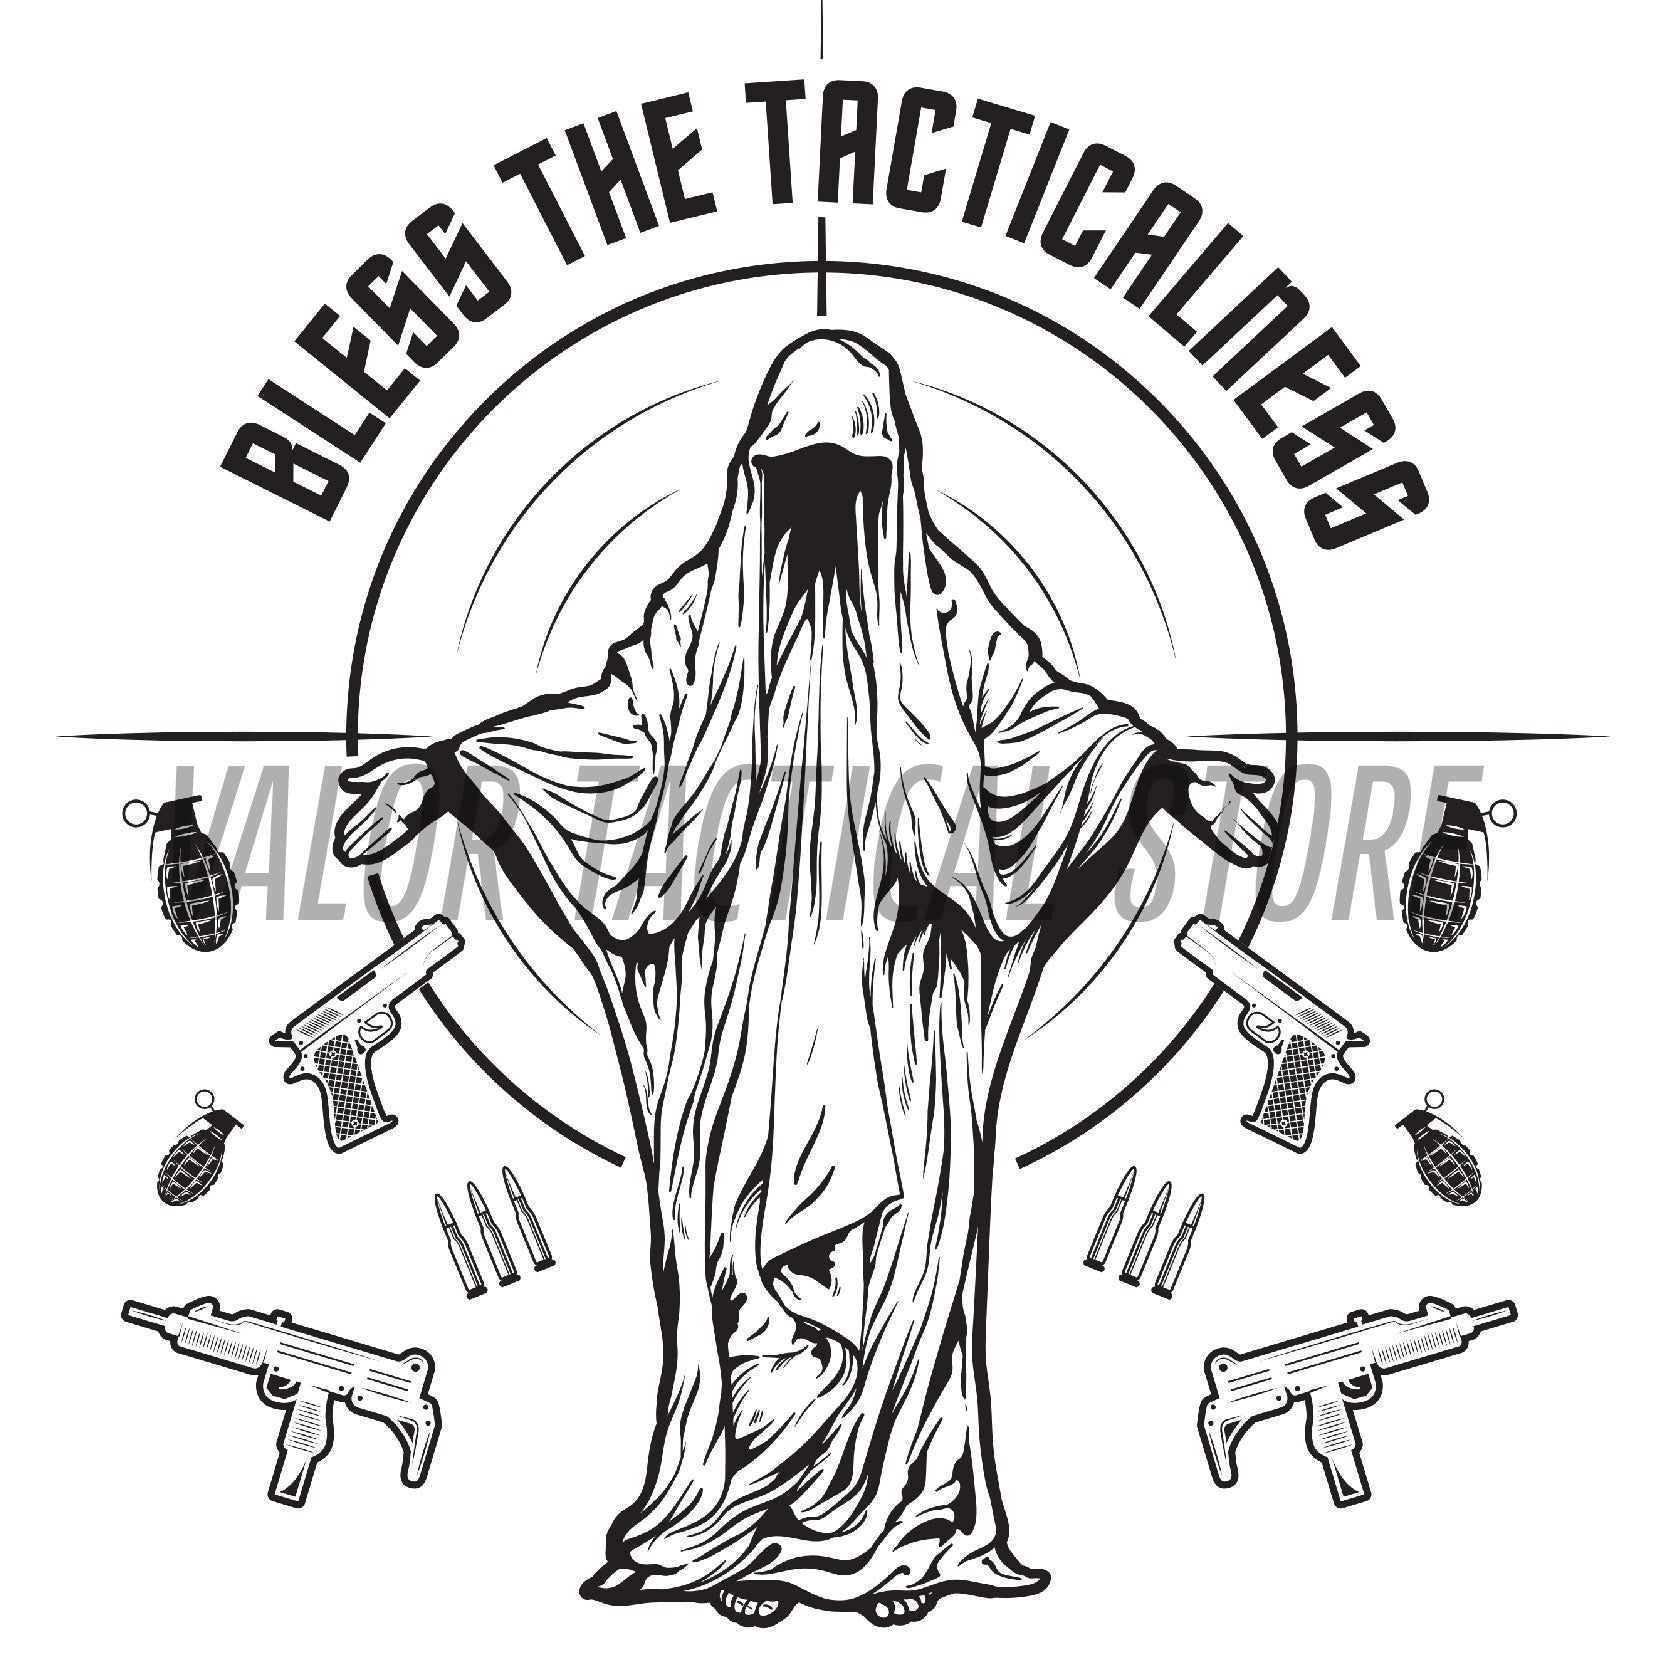 Valor PX Bless The Tacticalness T-Shirt